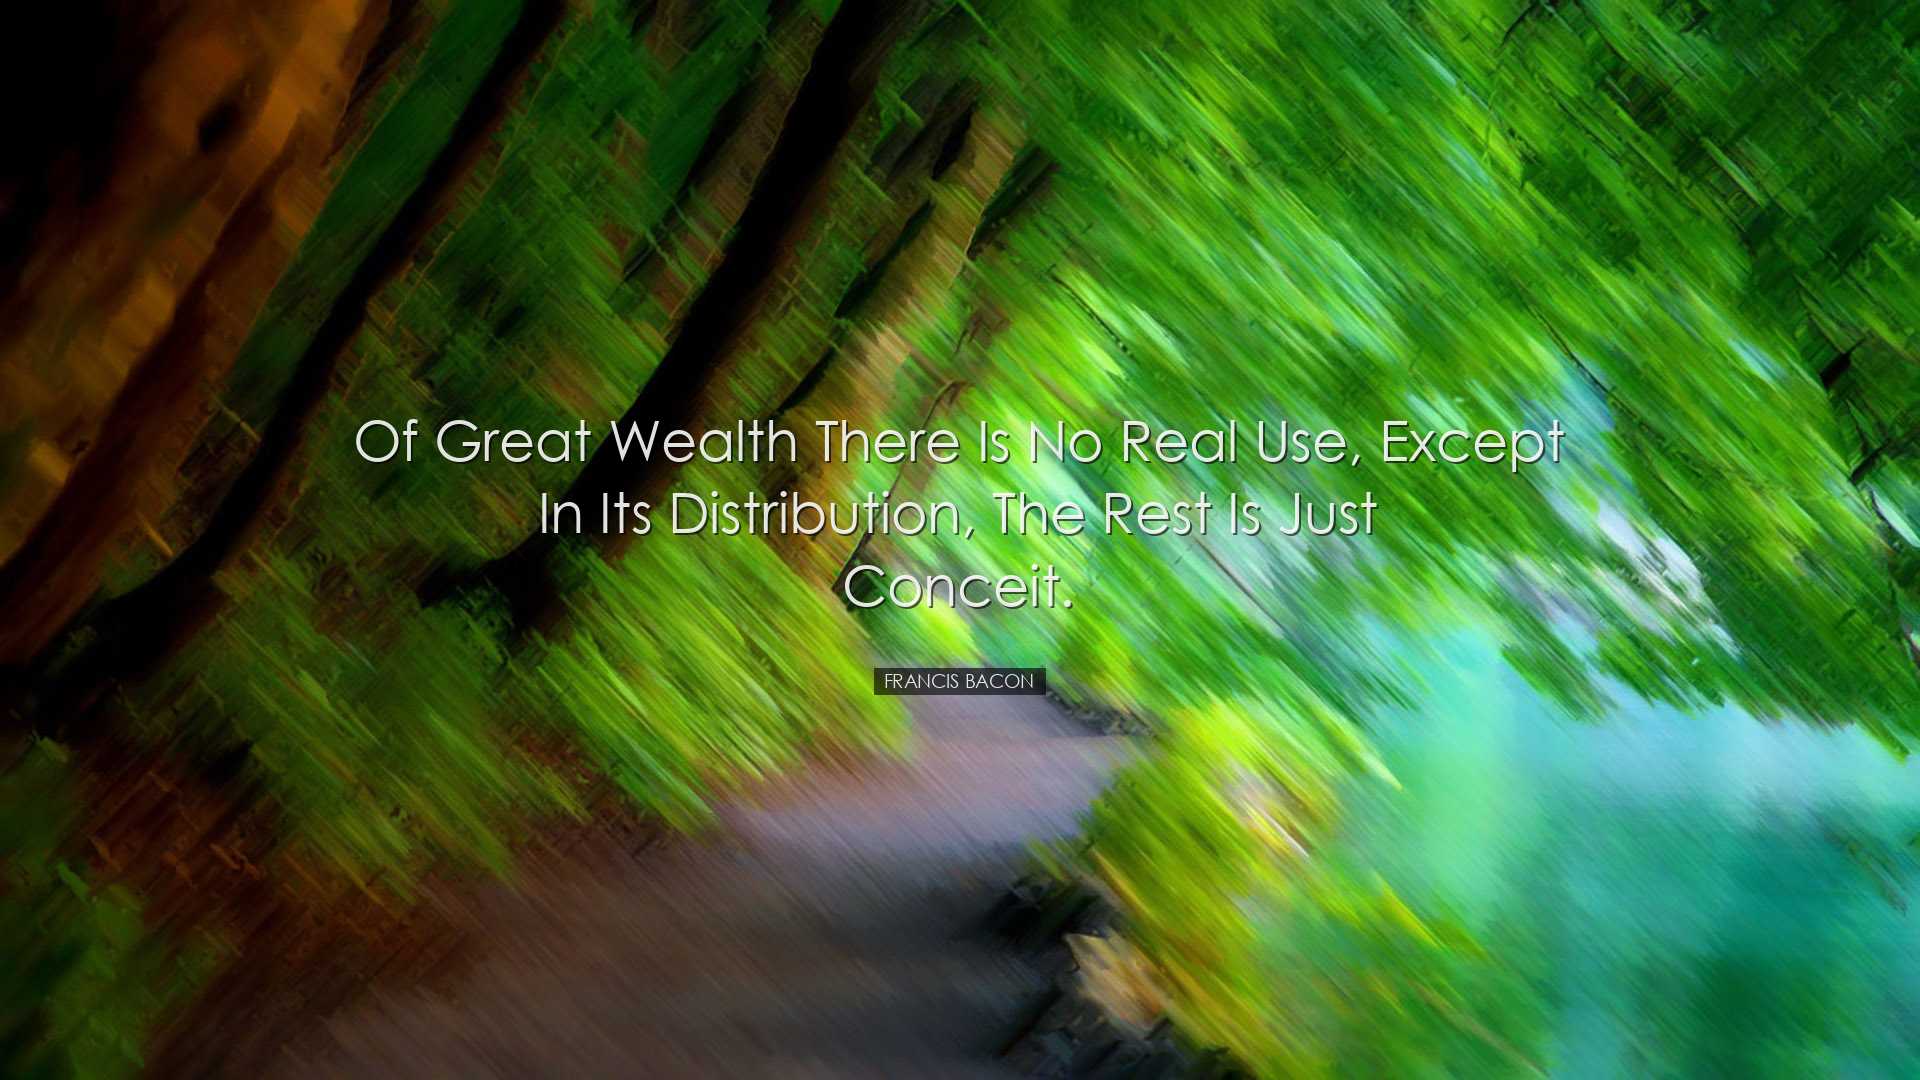 Of great wealth there is no real use, except in its distribution,